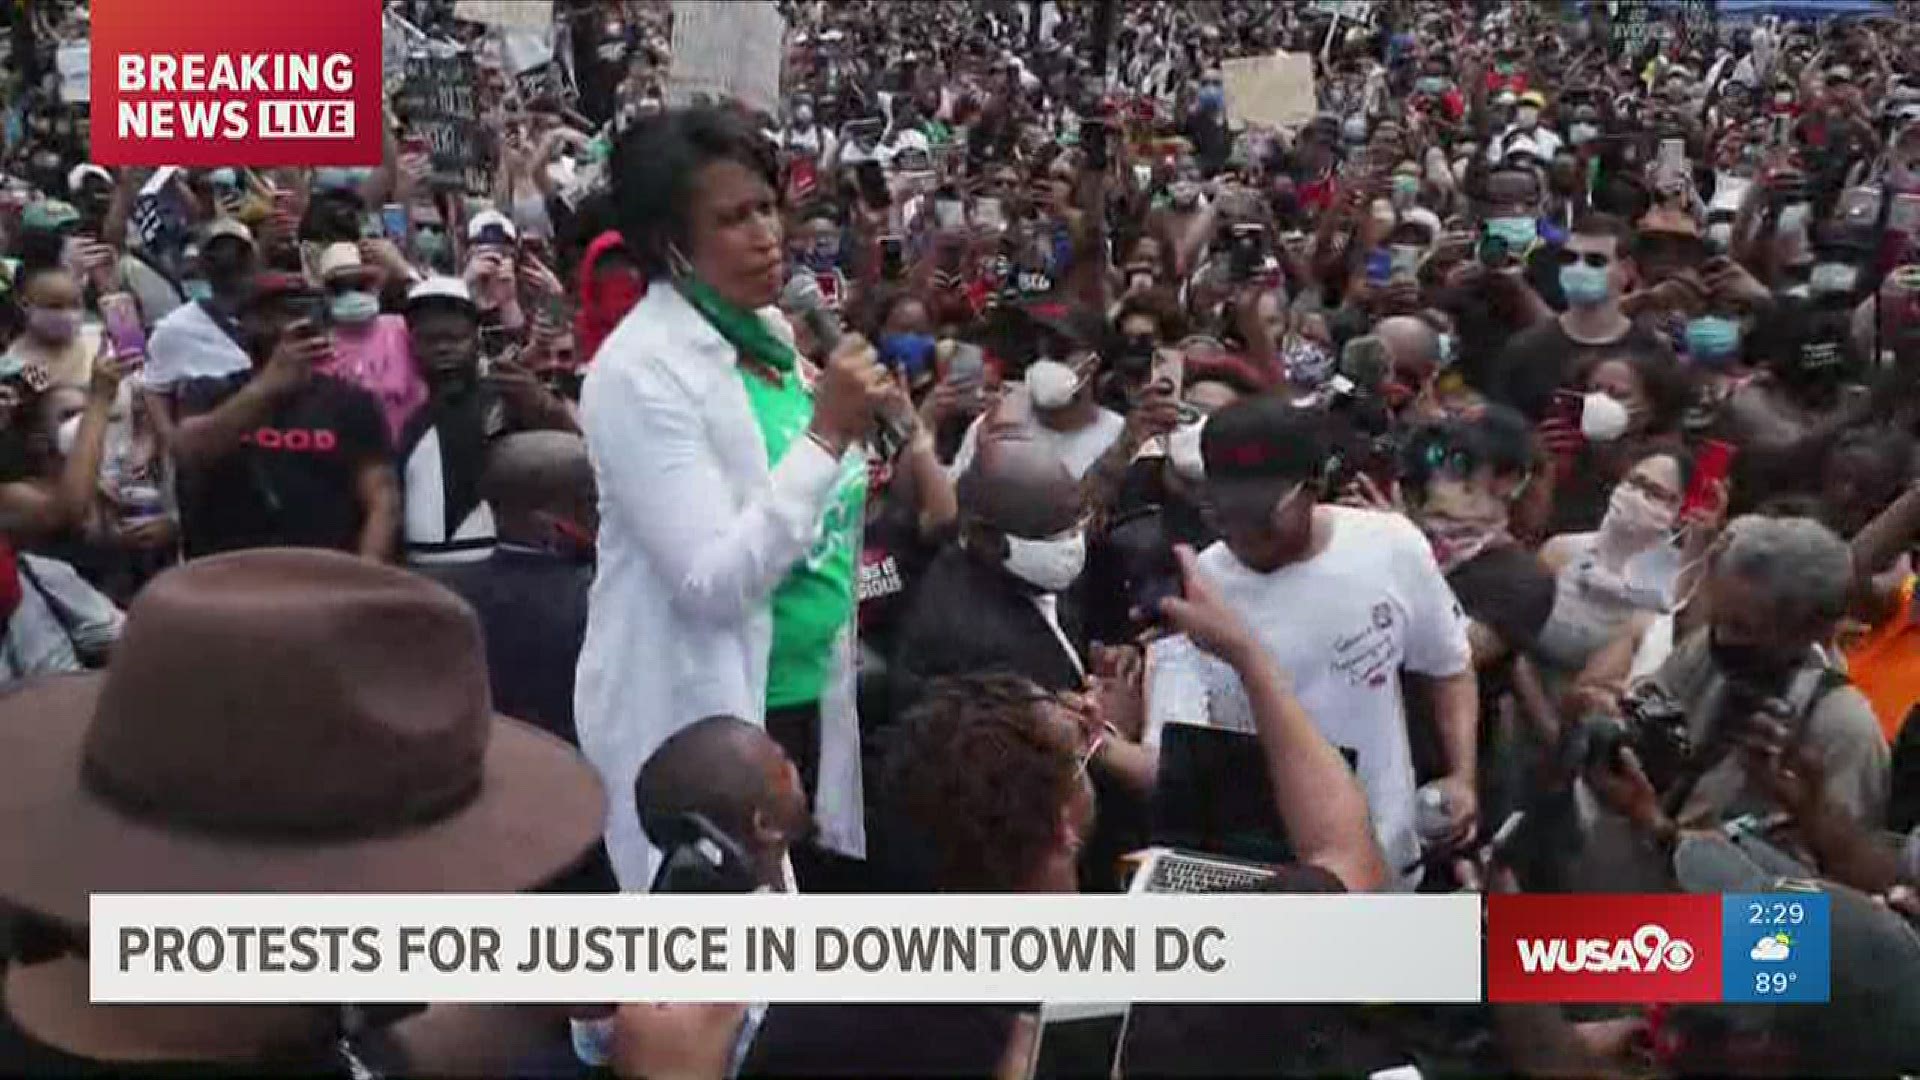 Mayor Muriel Bowser encourages protesters to speak up for justice and peace.